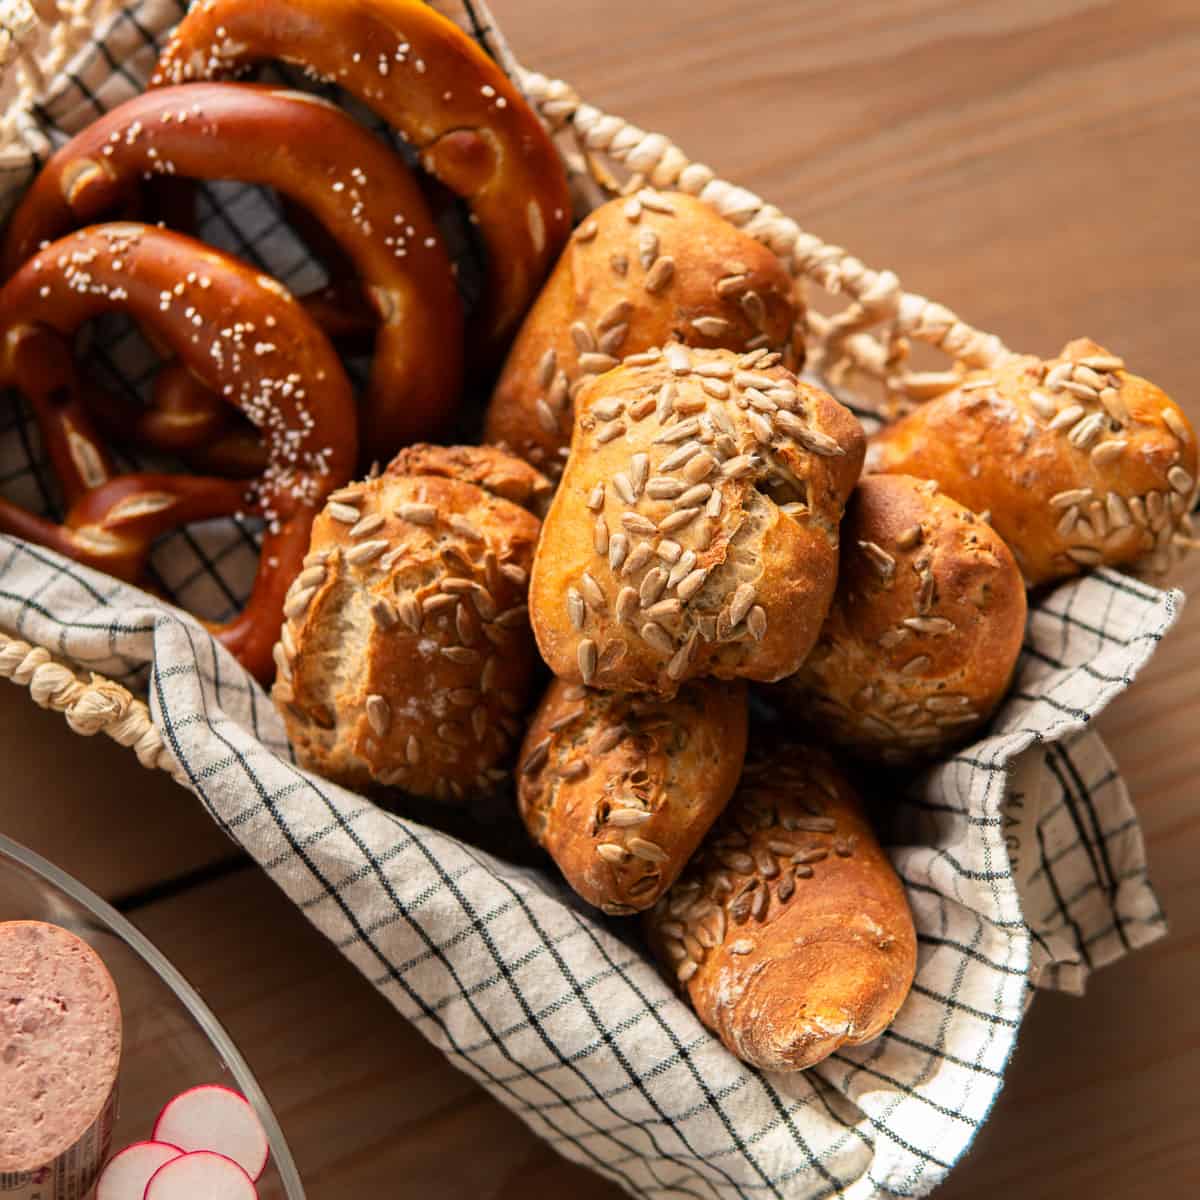 brötchen and pretzels in a bread basket